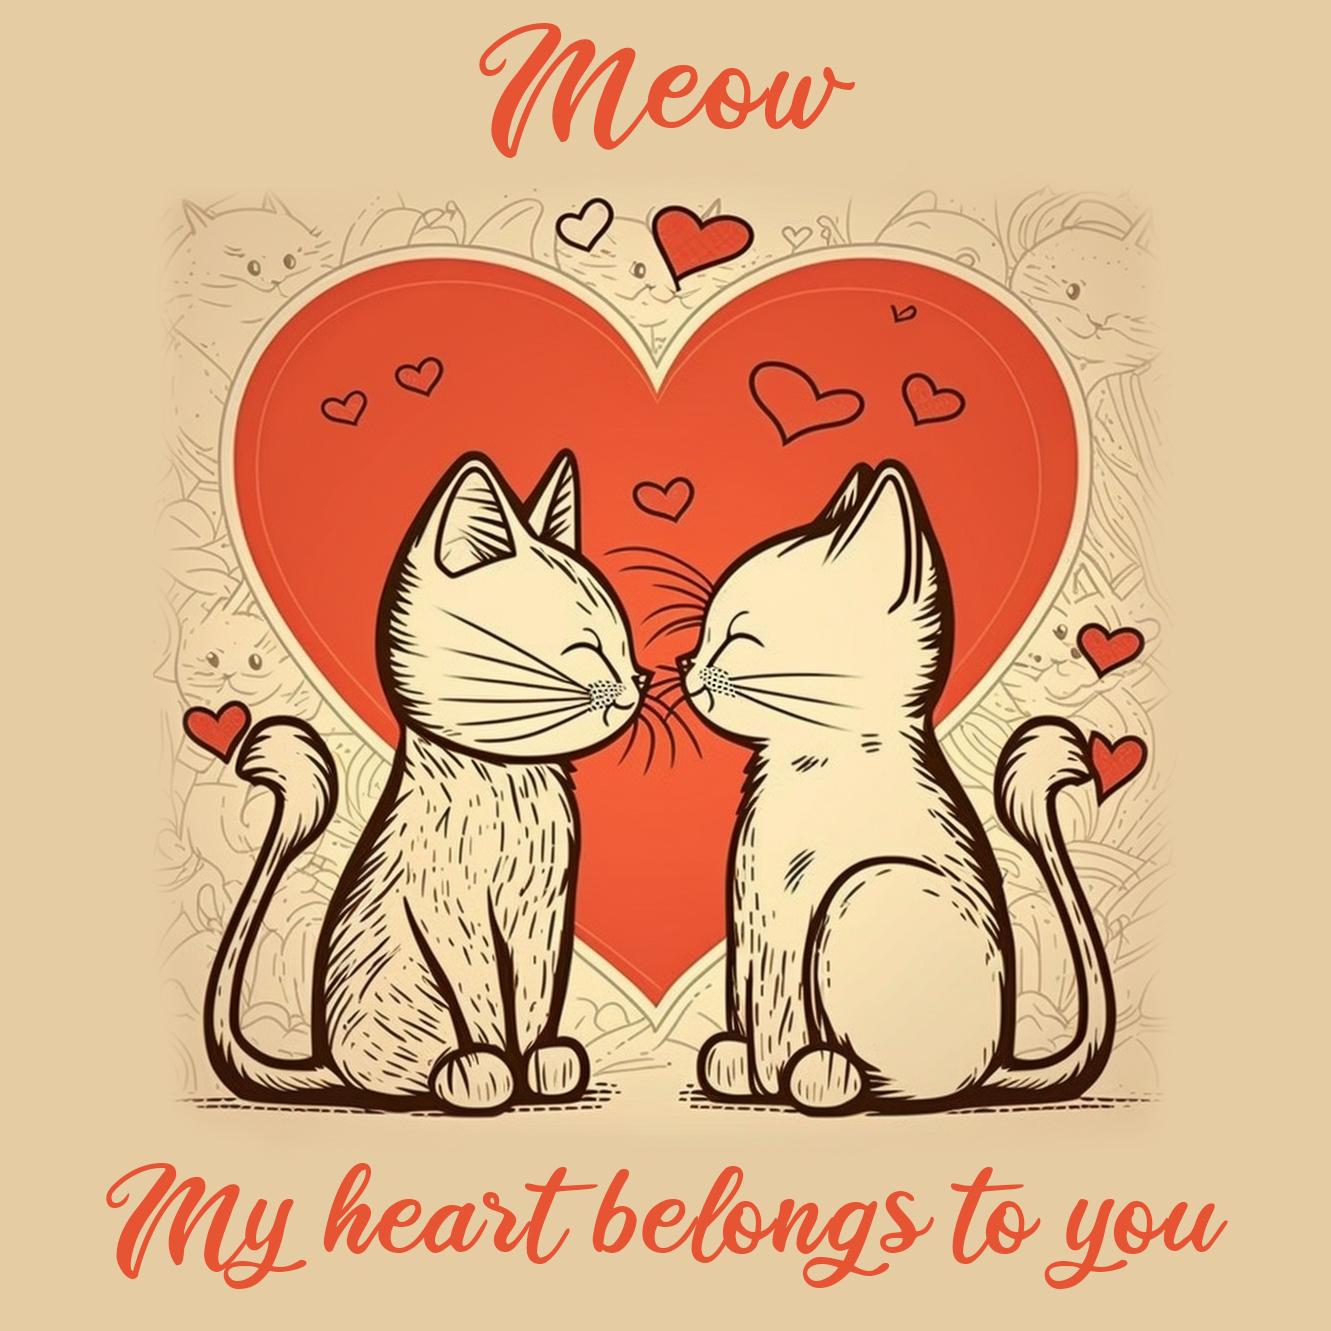 Two Cats in Love: A Valentine's Day Card NFT cruzo